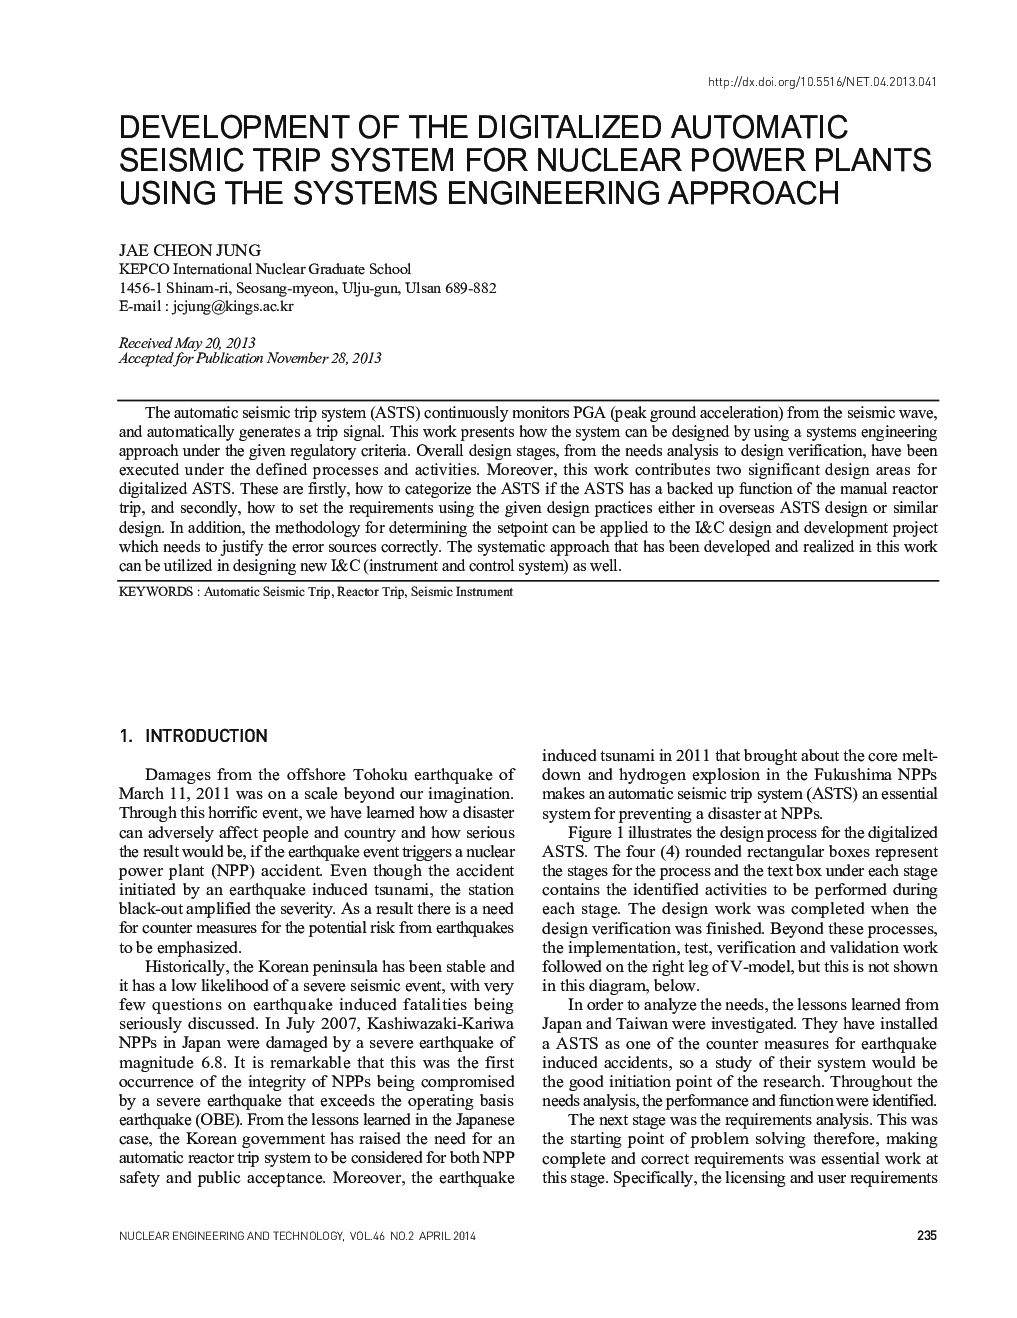 DEVELOPMENT OF THE DIGITALIZED AUTOMATIC SEISMIC TRIP SYSTEM FOR NUCLEAR POWER PLANTS USING THE SYSTEMS ENGINEERING APPROACH